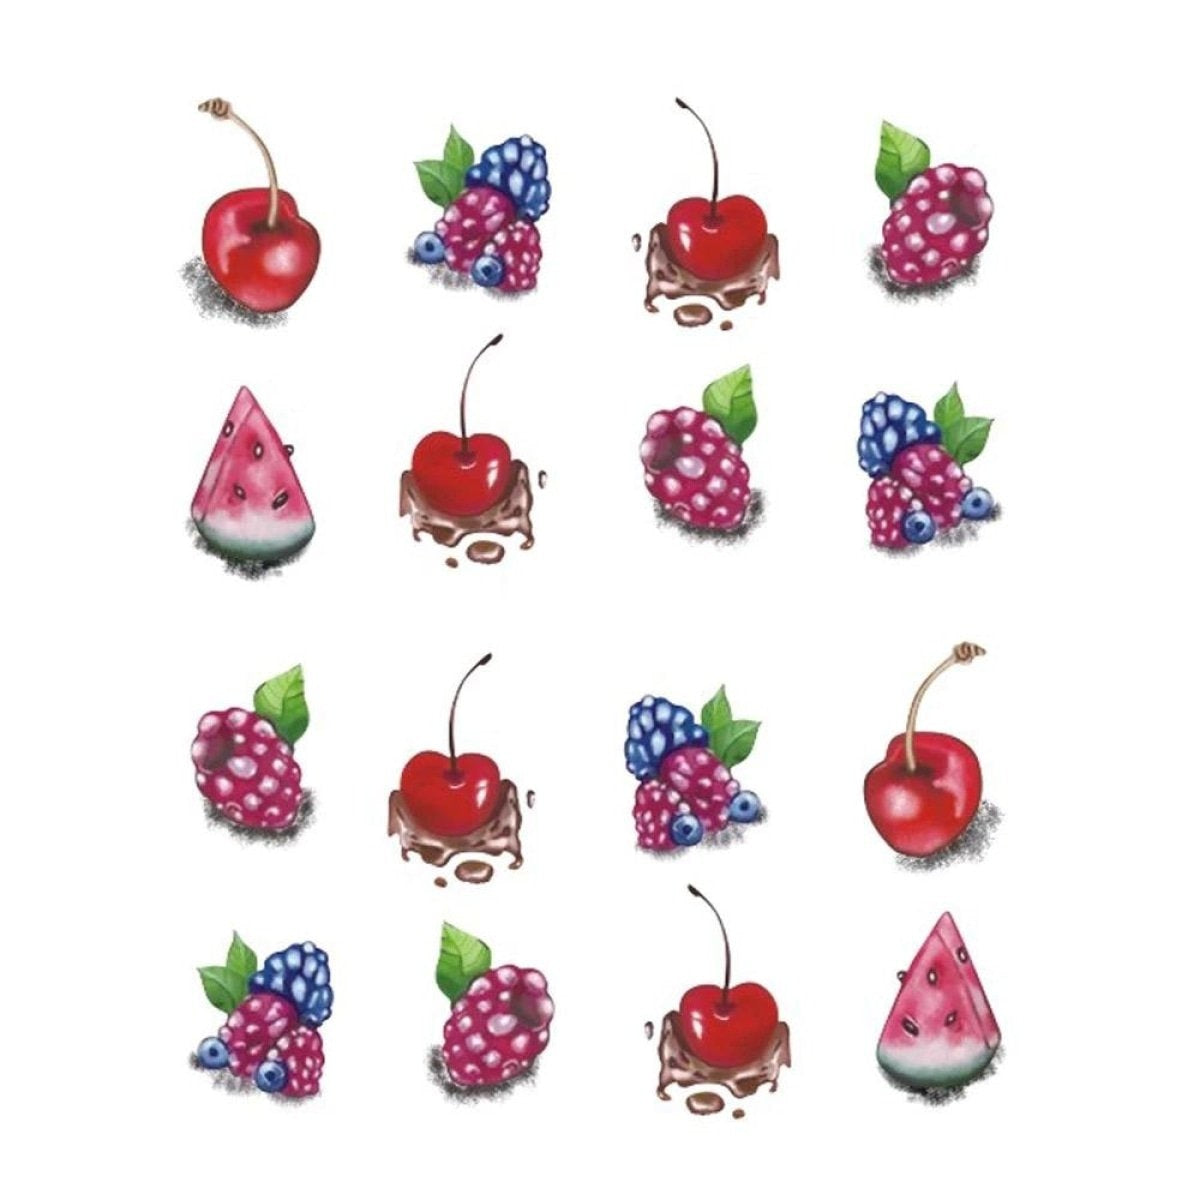 Strawberry Summer Cake & Fruit Stickers For Nails Nail Manicure Art Stz-491 - Sheet